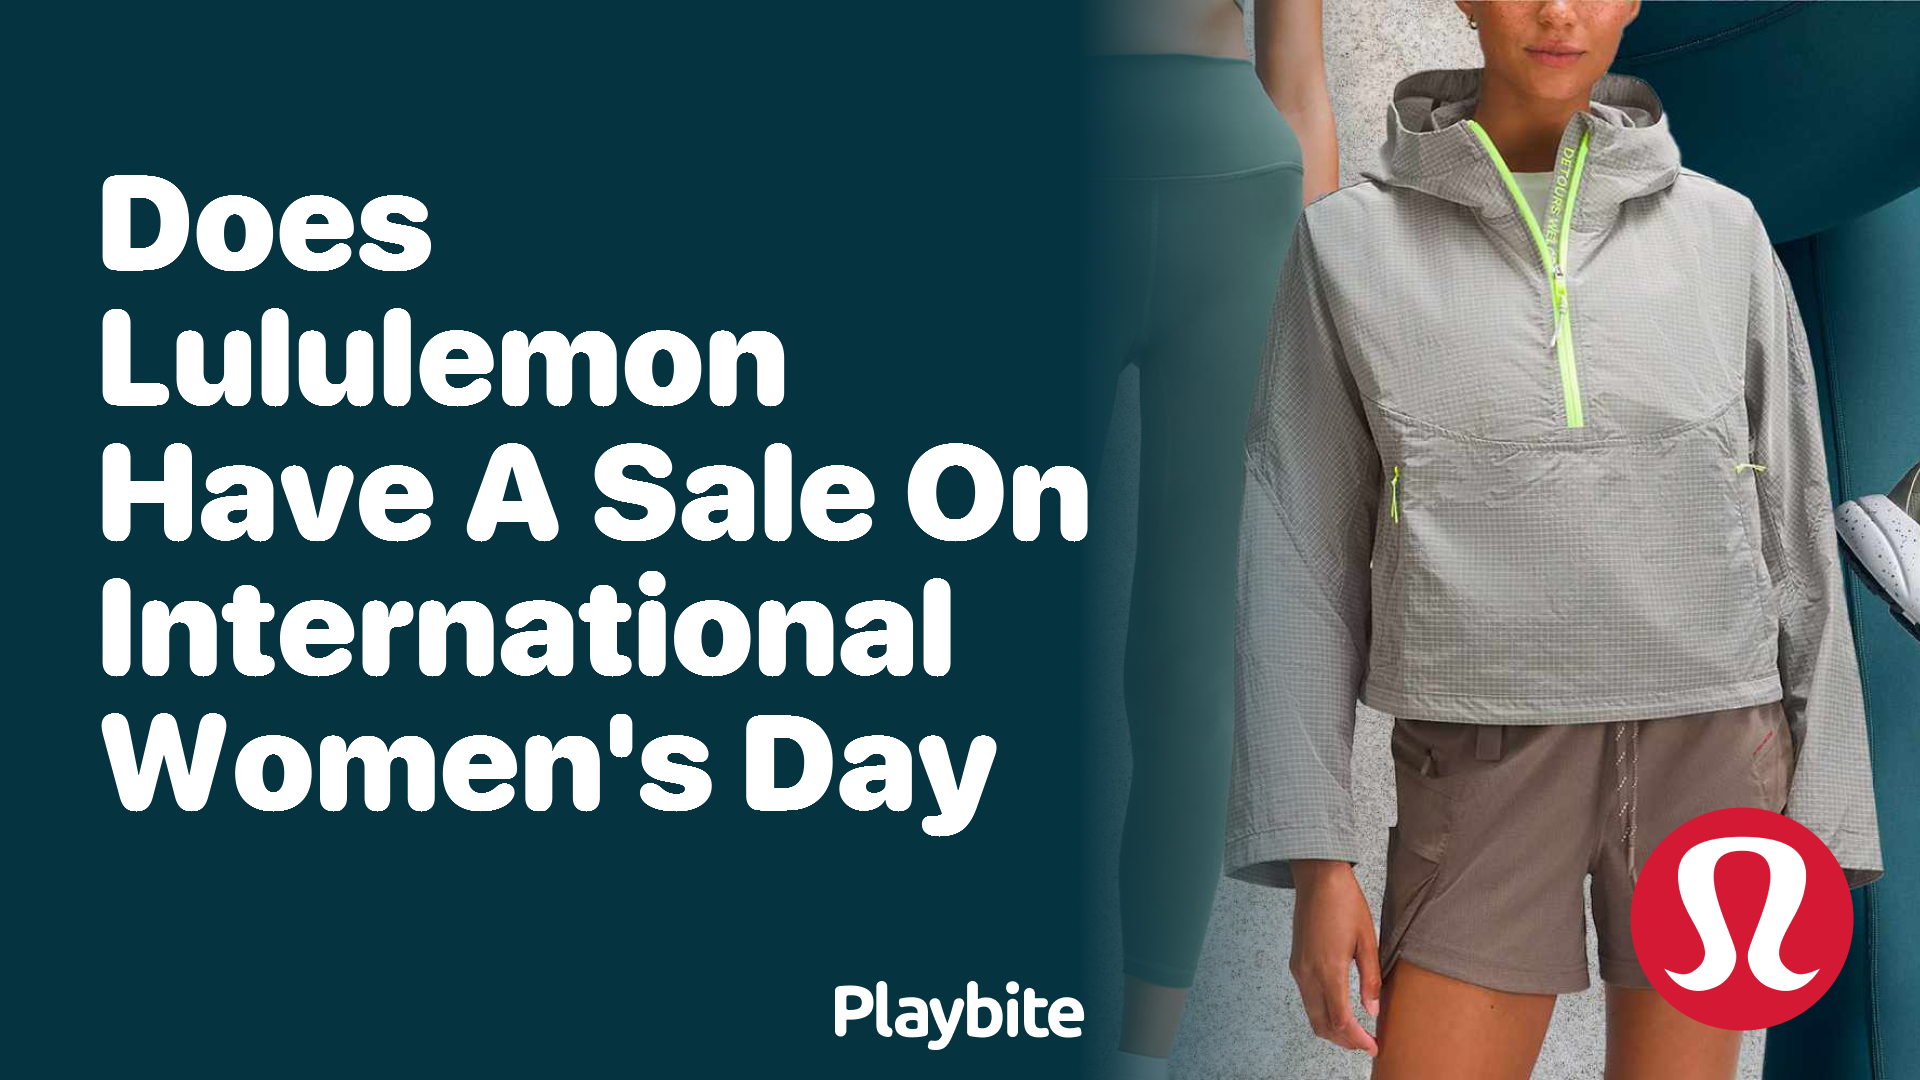 Does Lululemon Have a Sale on International Women's Day? - Playbite